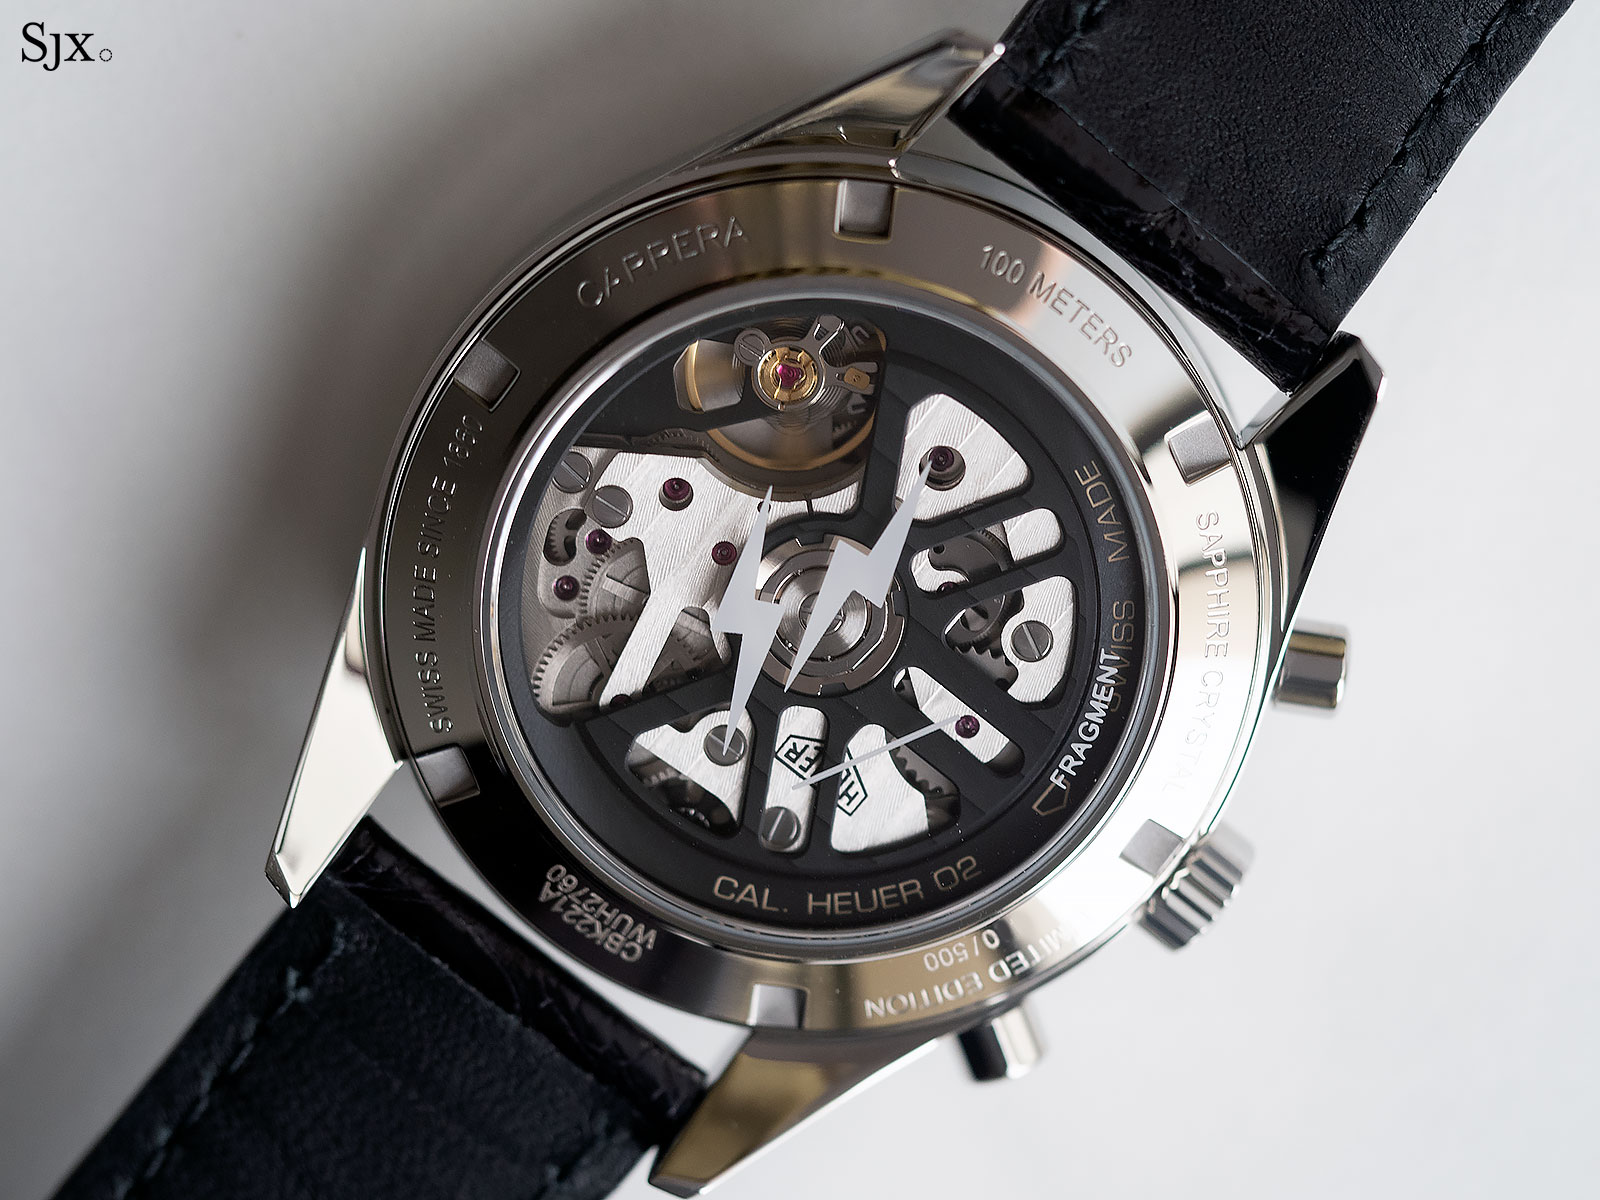 Hands-On with the TAG Heuer Fragment Design Carrera Heuer 02 | SJX 